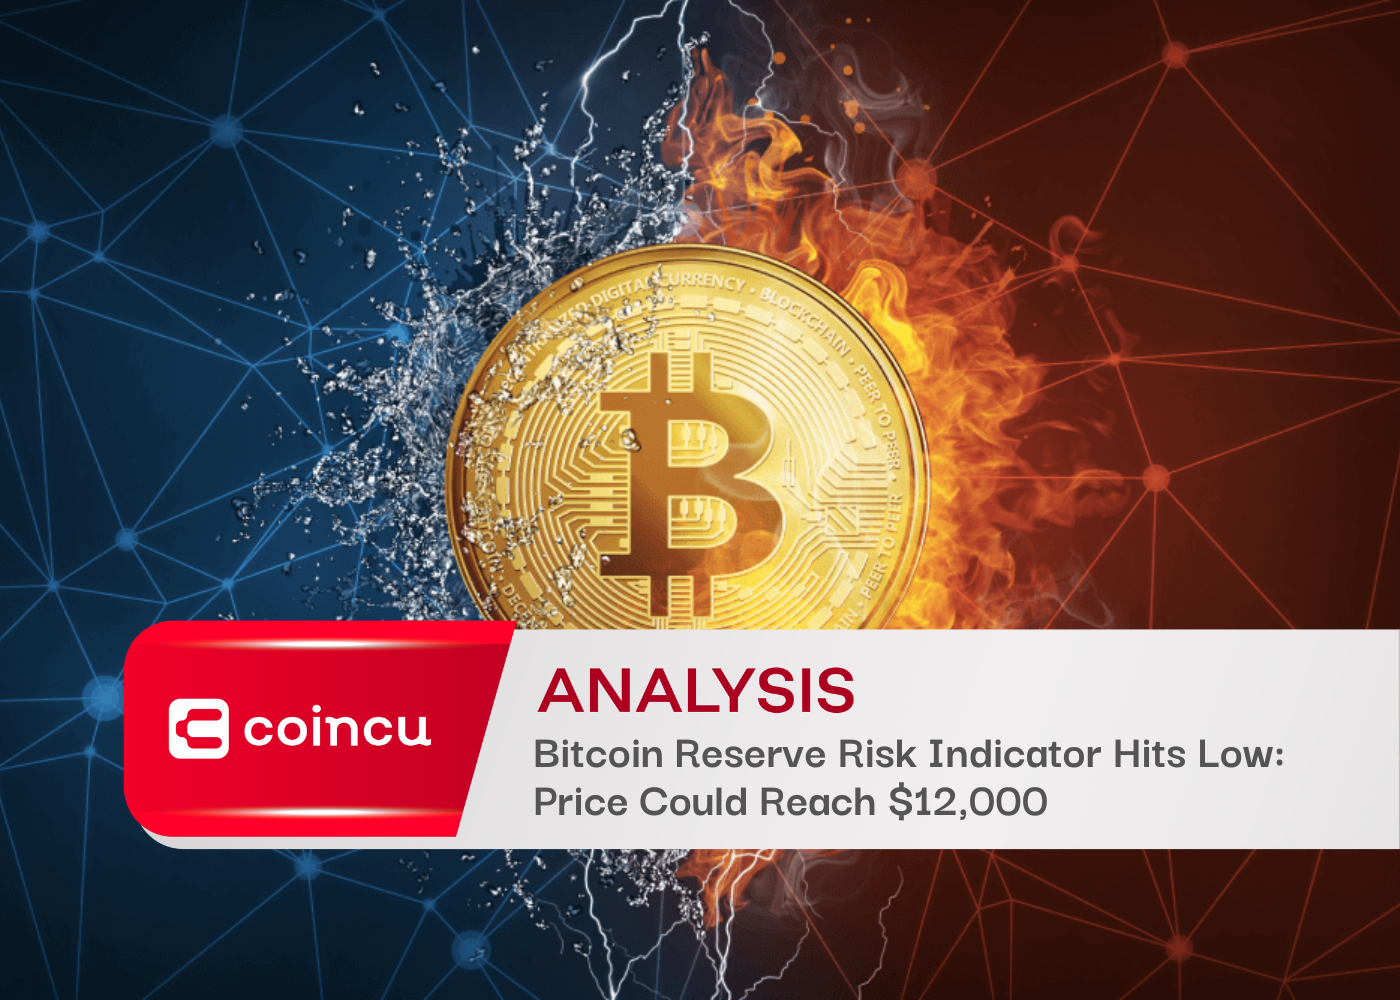 Bitcoin Reserve Risk Indicator Hits Low: Price Could Reach $12,000